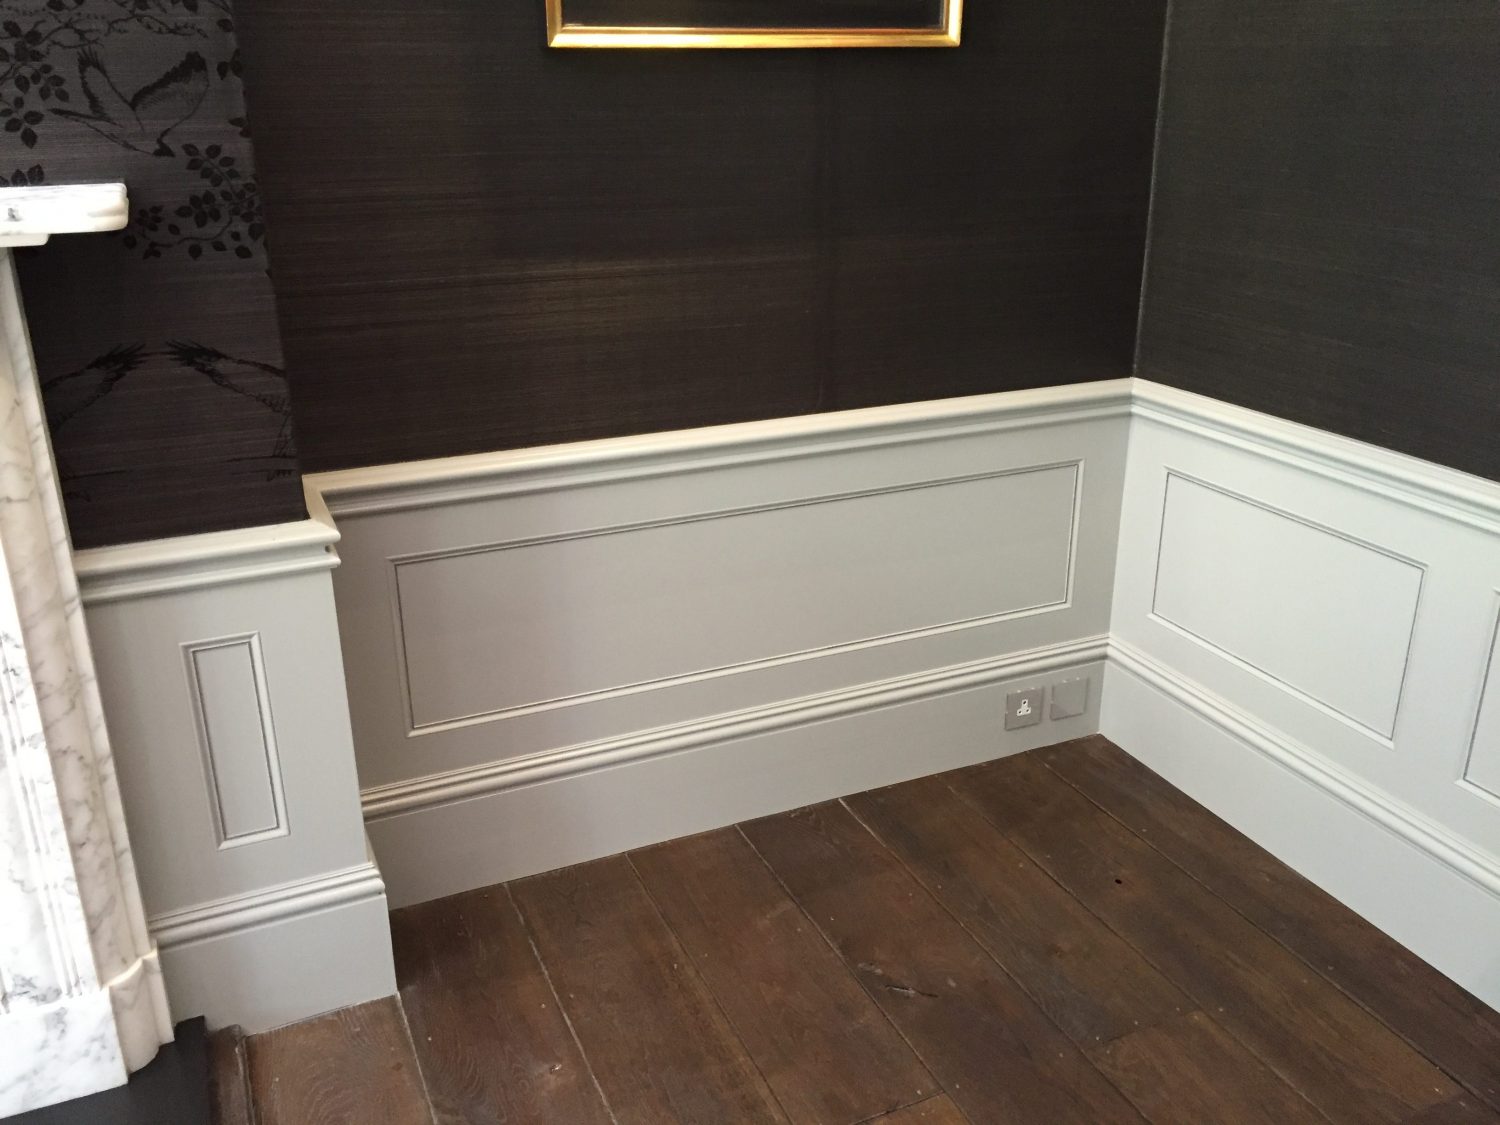 Large Panels in Panelling